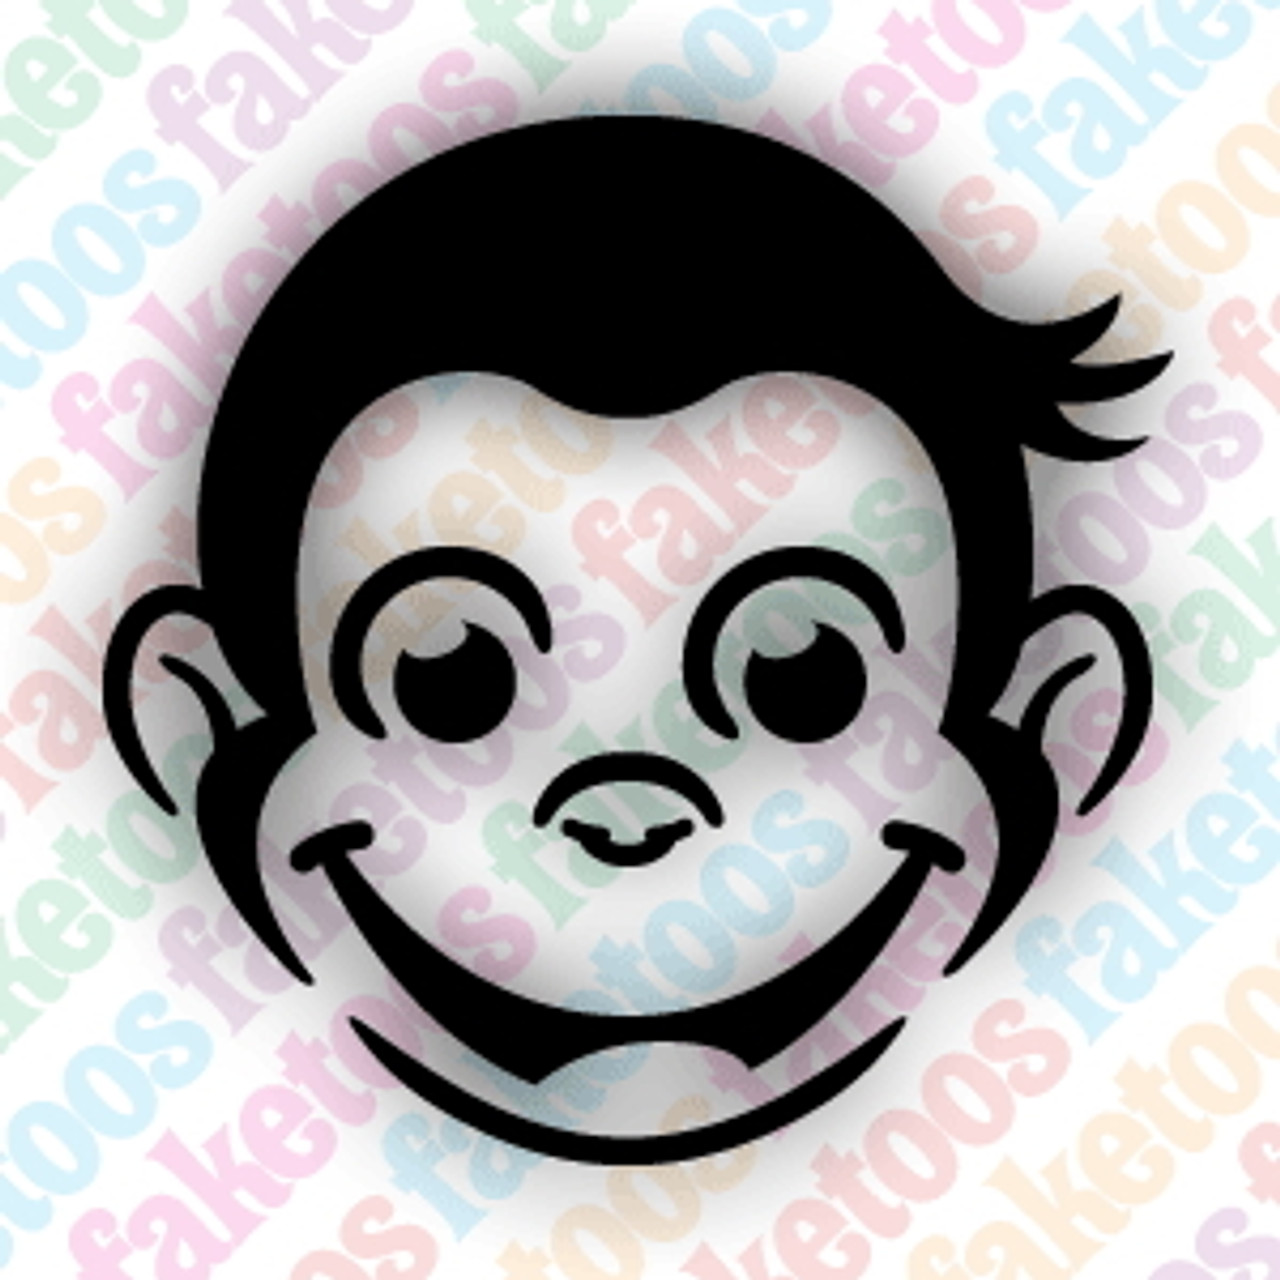 Curious George by ErinClayton on DeviantArt